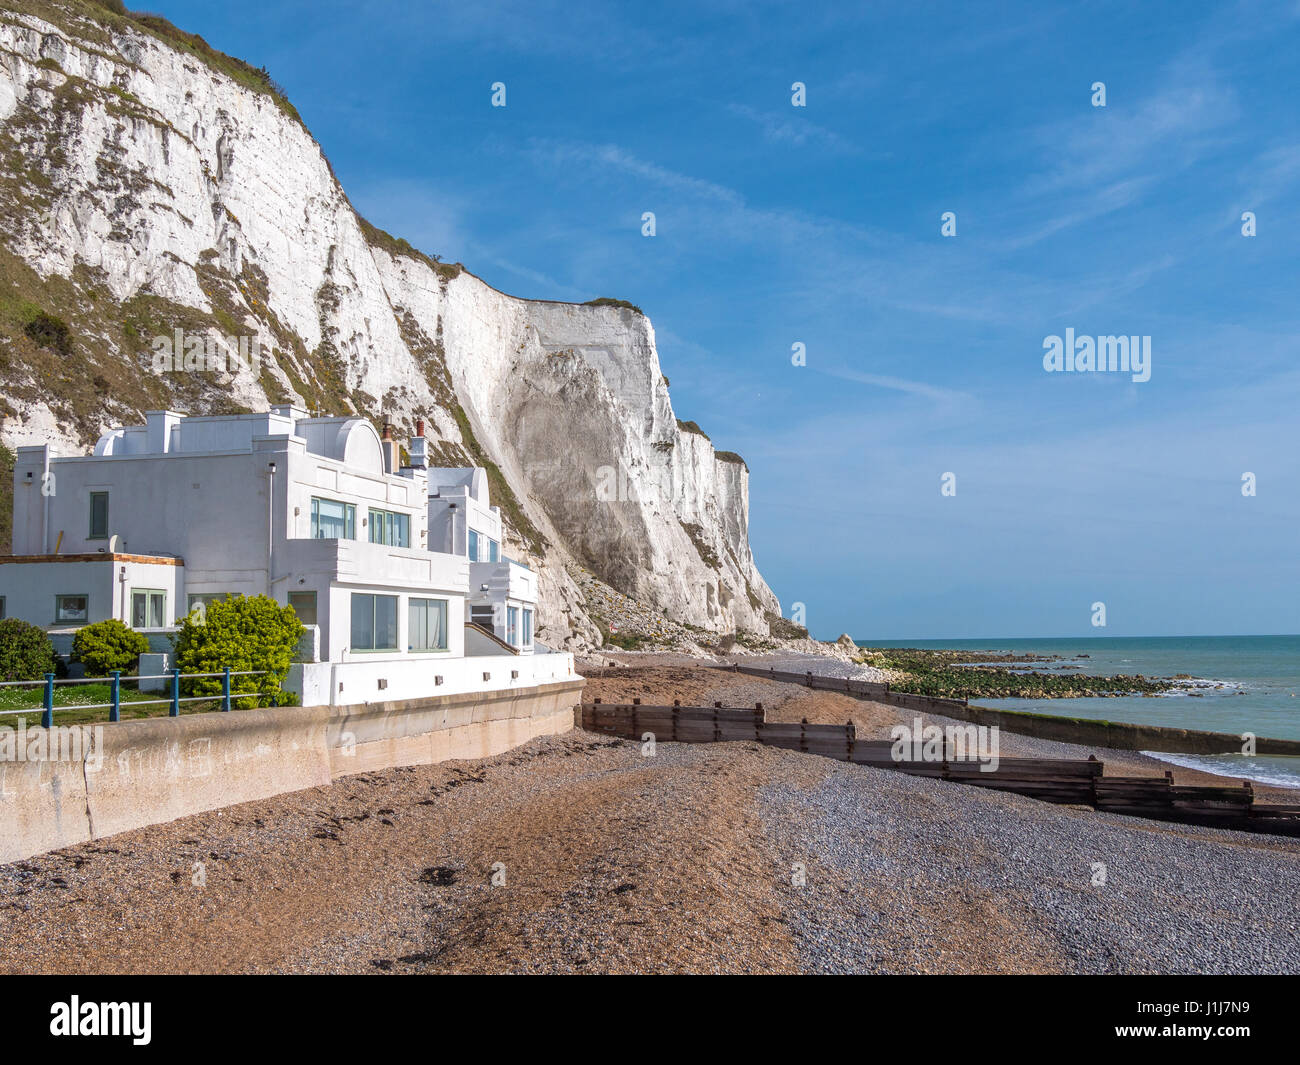 The White Cliffs of Dover at St. Margarets Bay, Dover, UK. Stock Photo